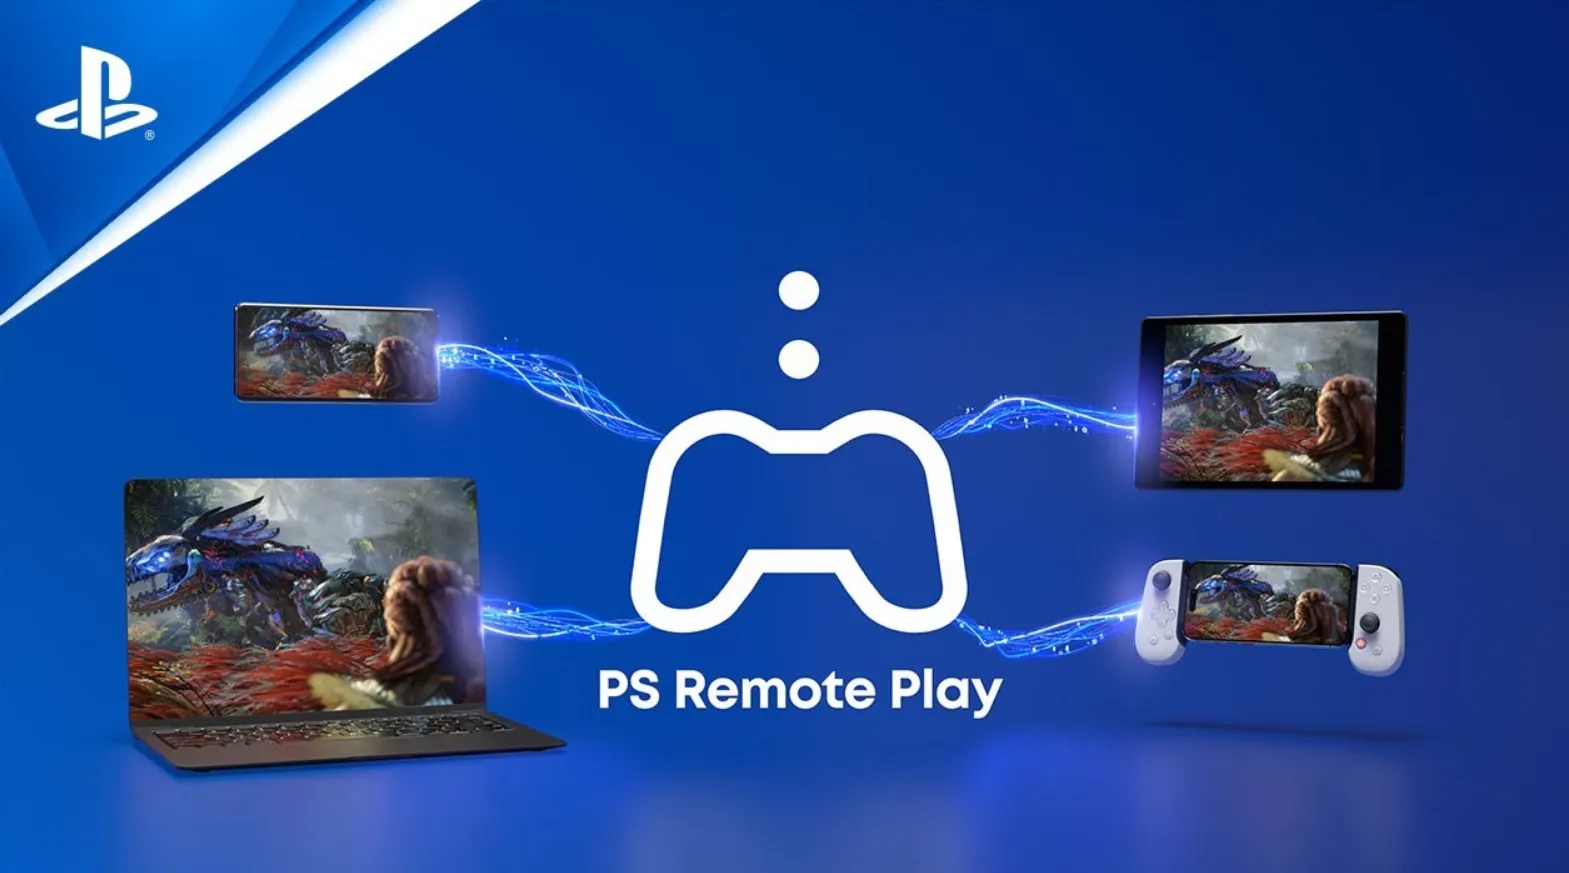 PS Remote Play application